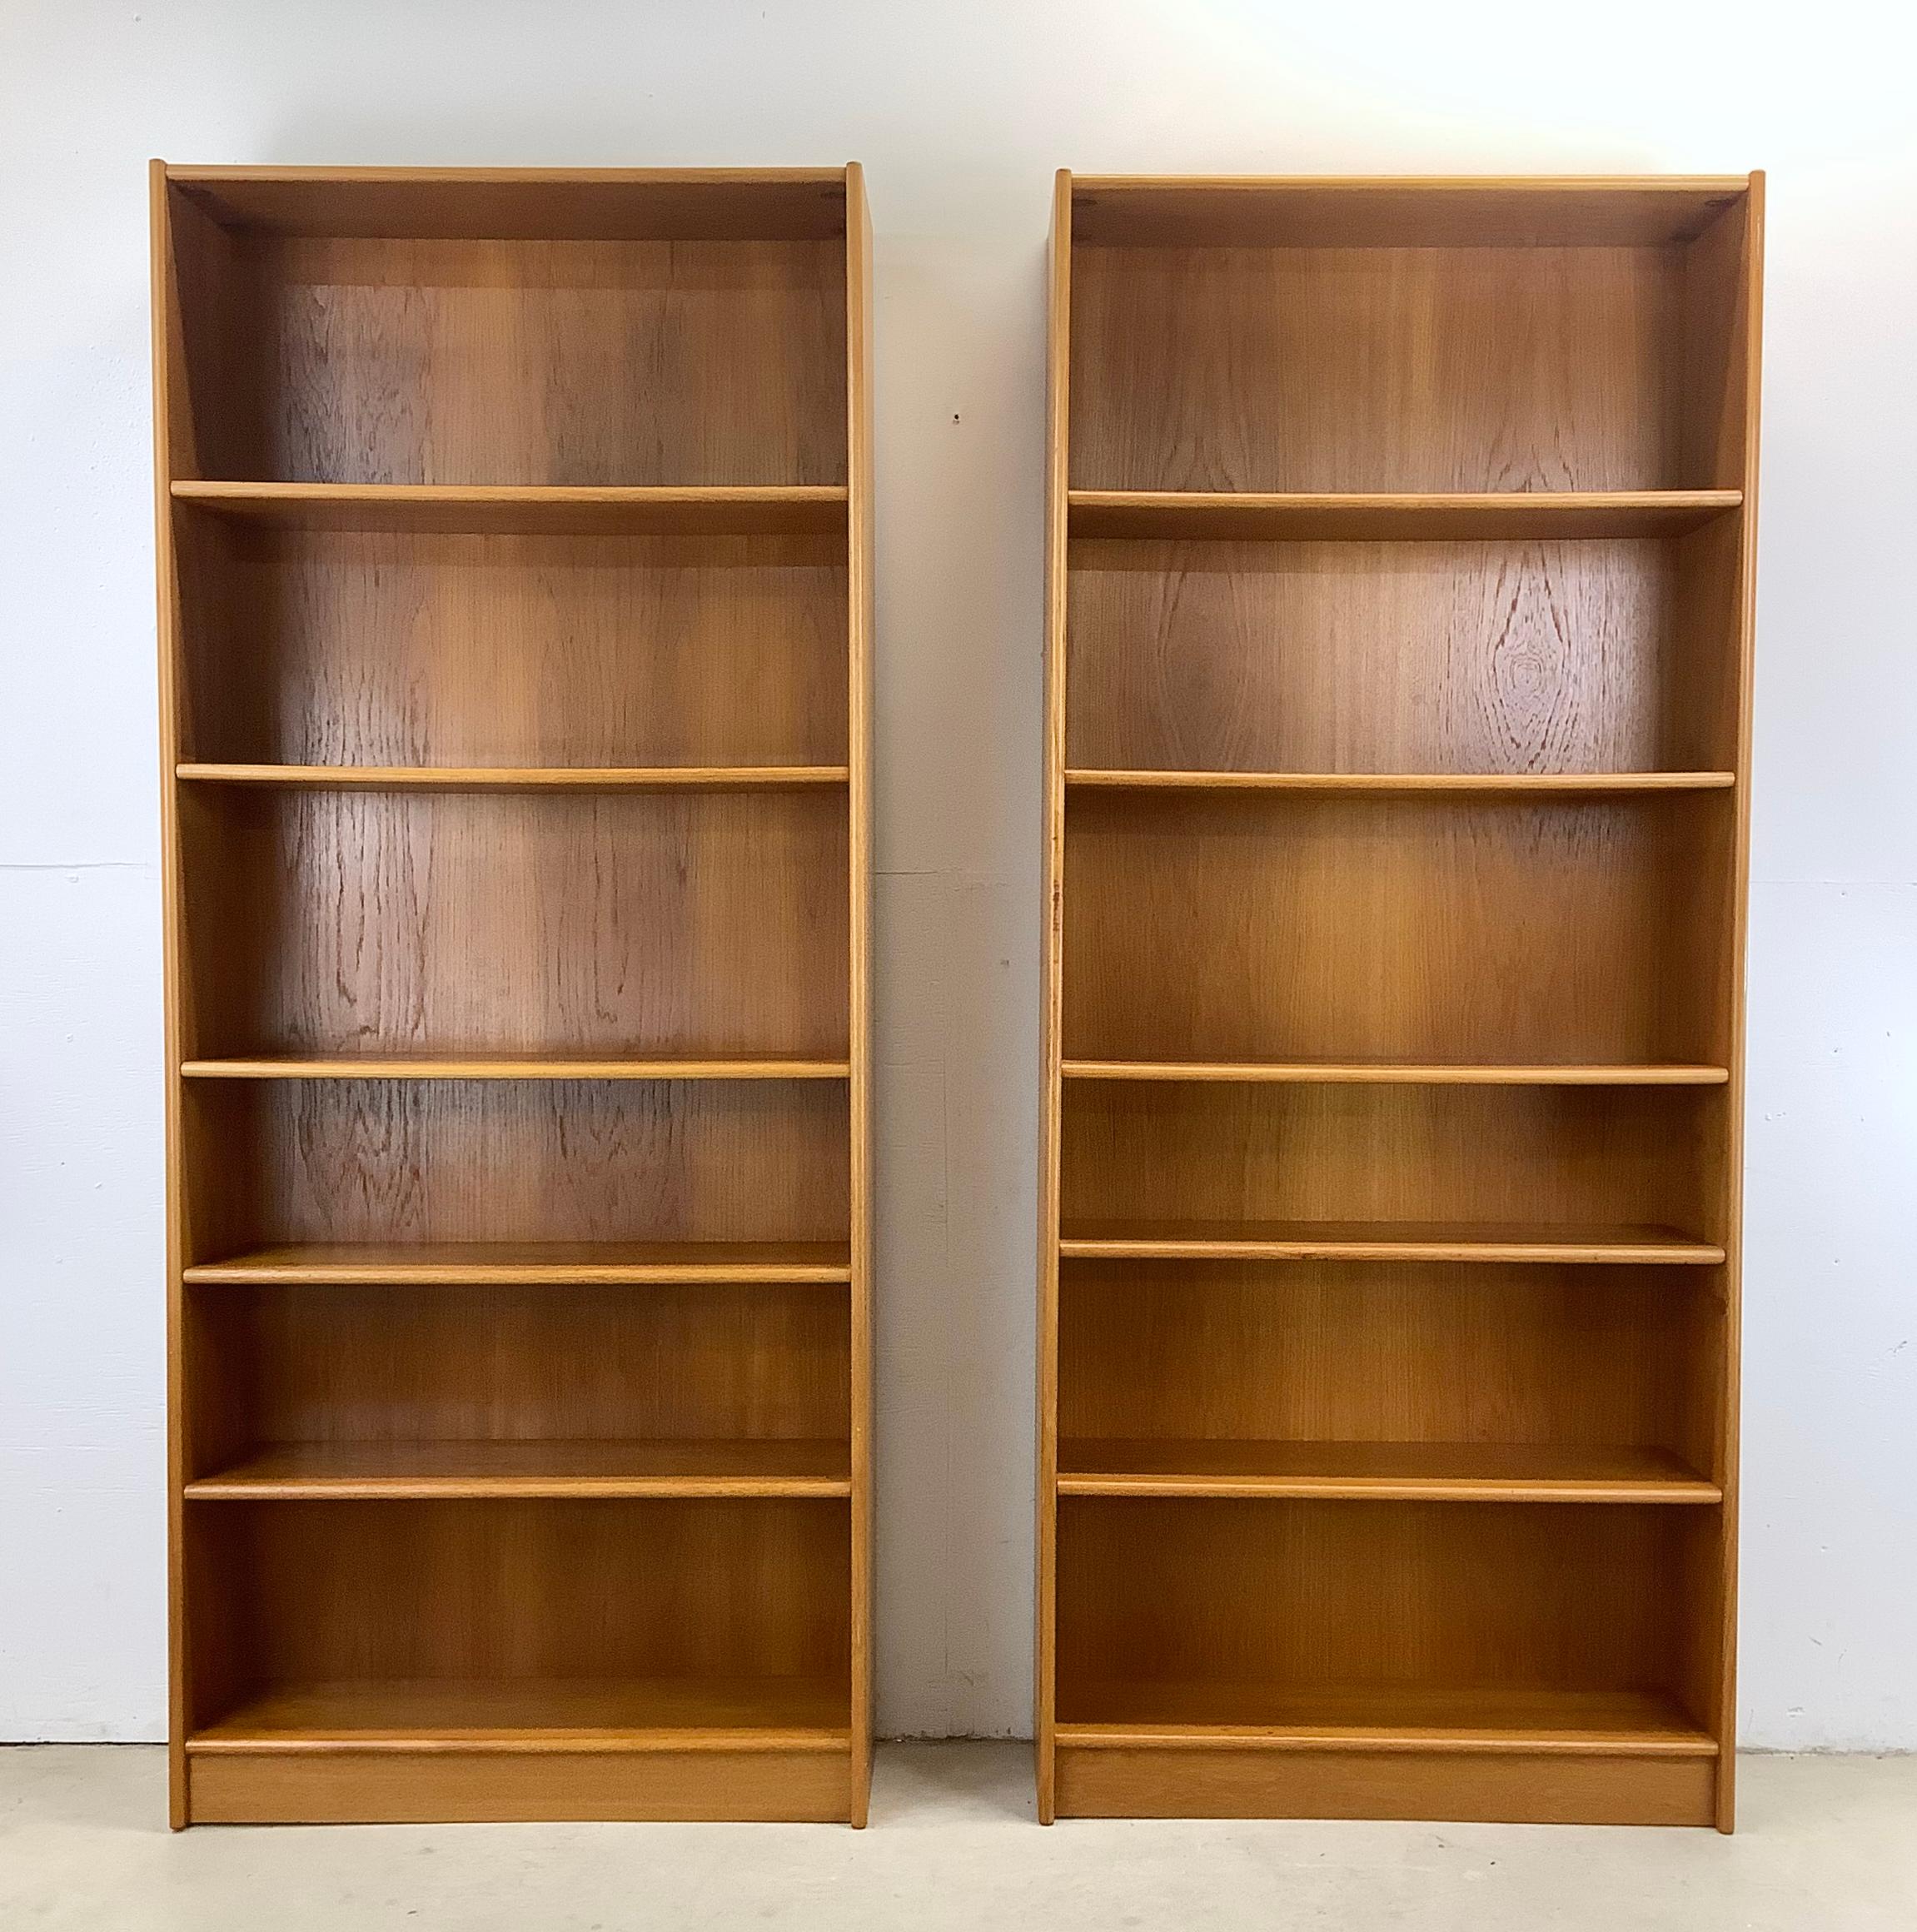 Elevate your home with this striking pair of tall vintage bookcases, echoing the renowned Danish modern design of Jesper Furniture. Perfectly sized for extra storage and versatility, these bookcases feature adjustable shelves, allowing you to